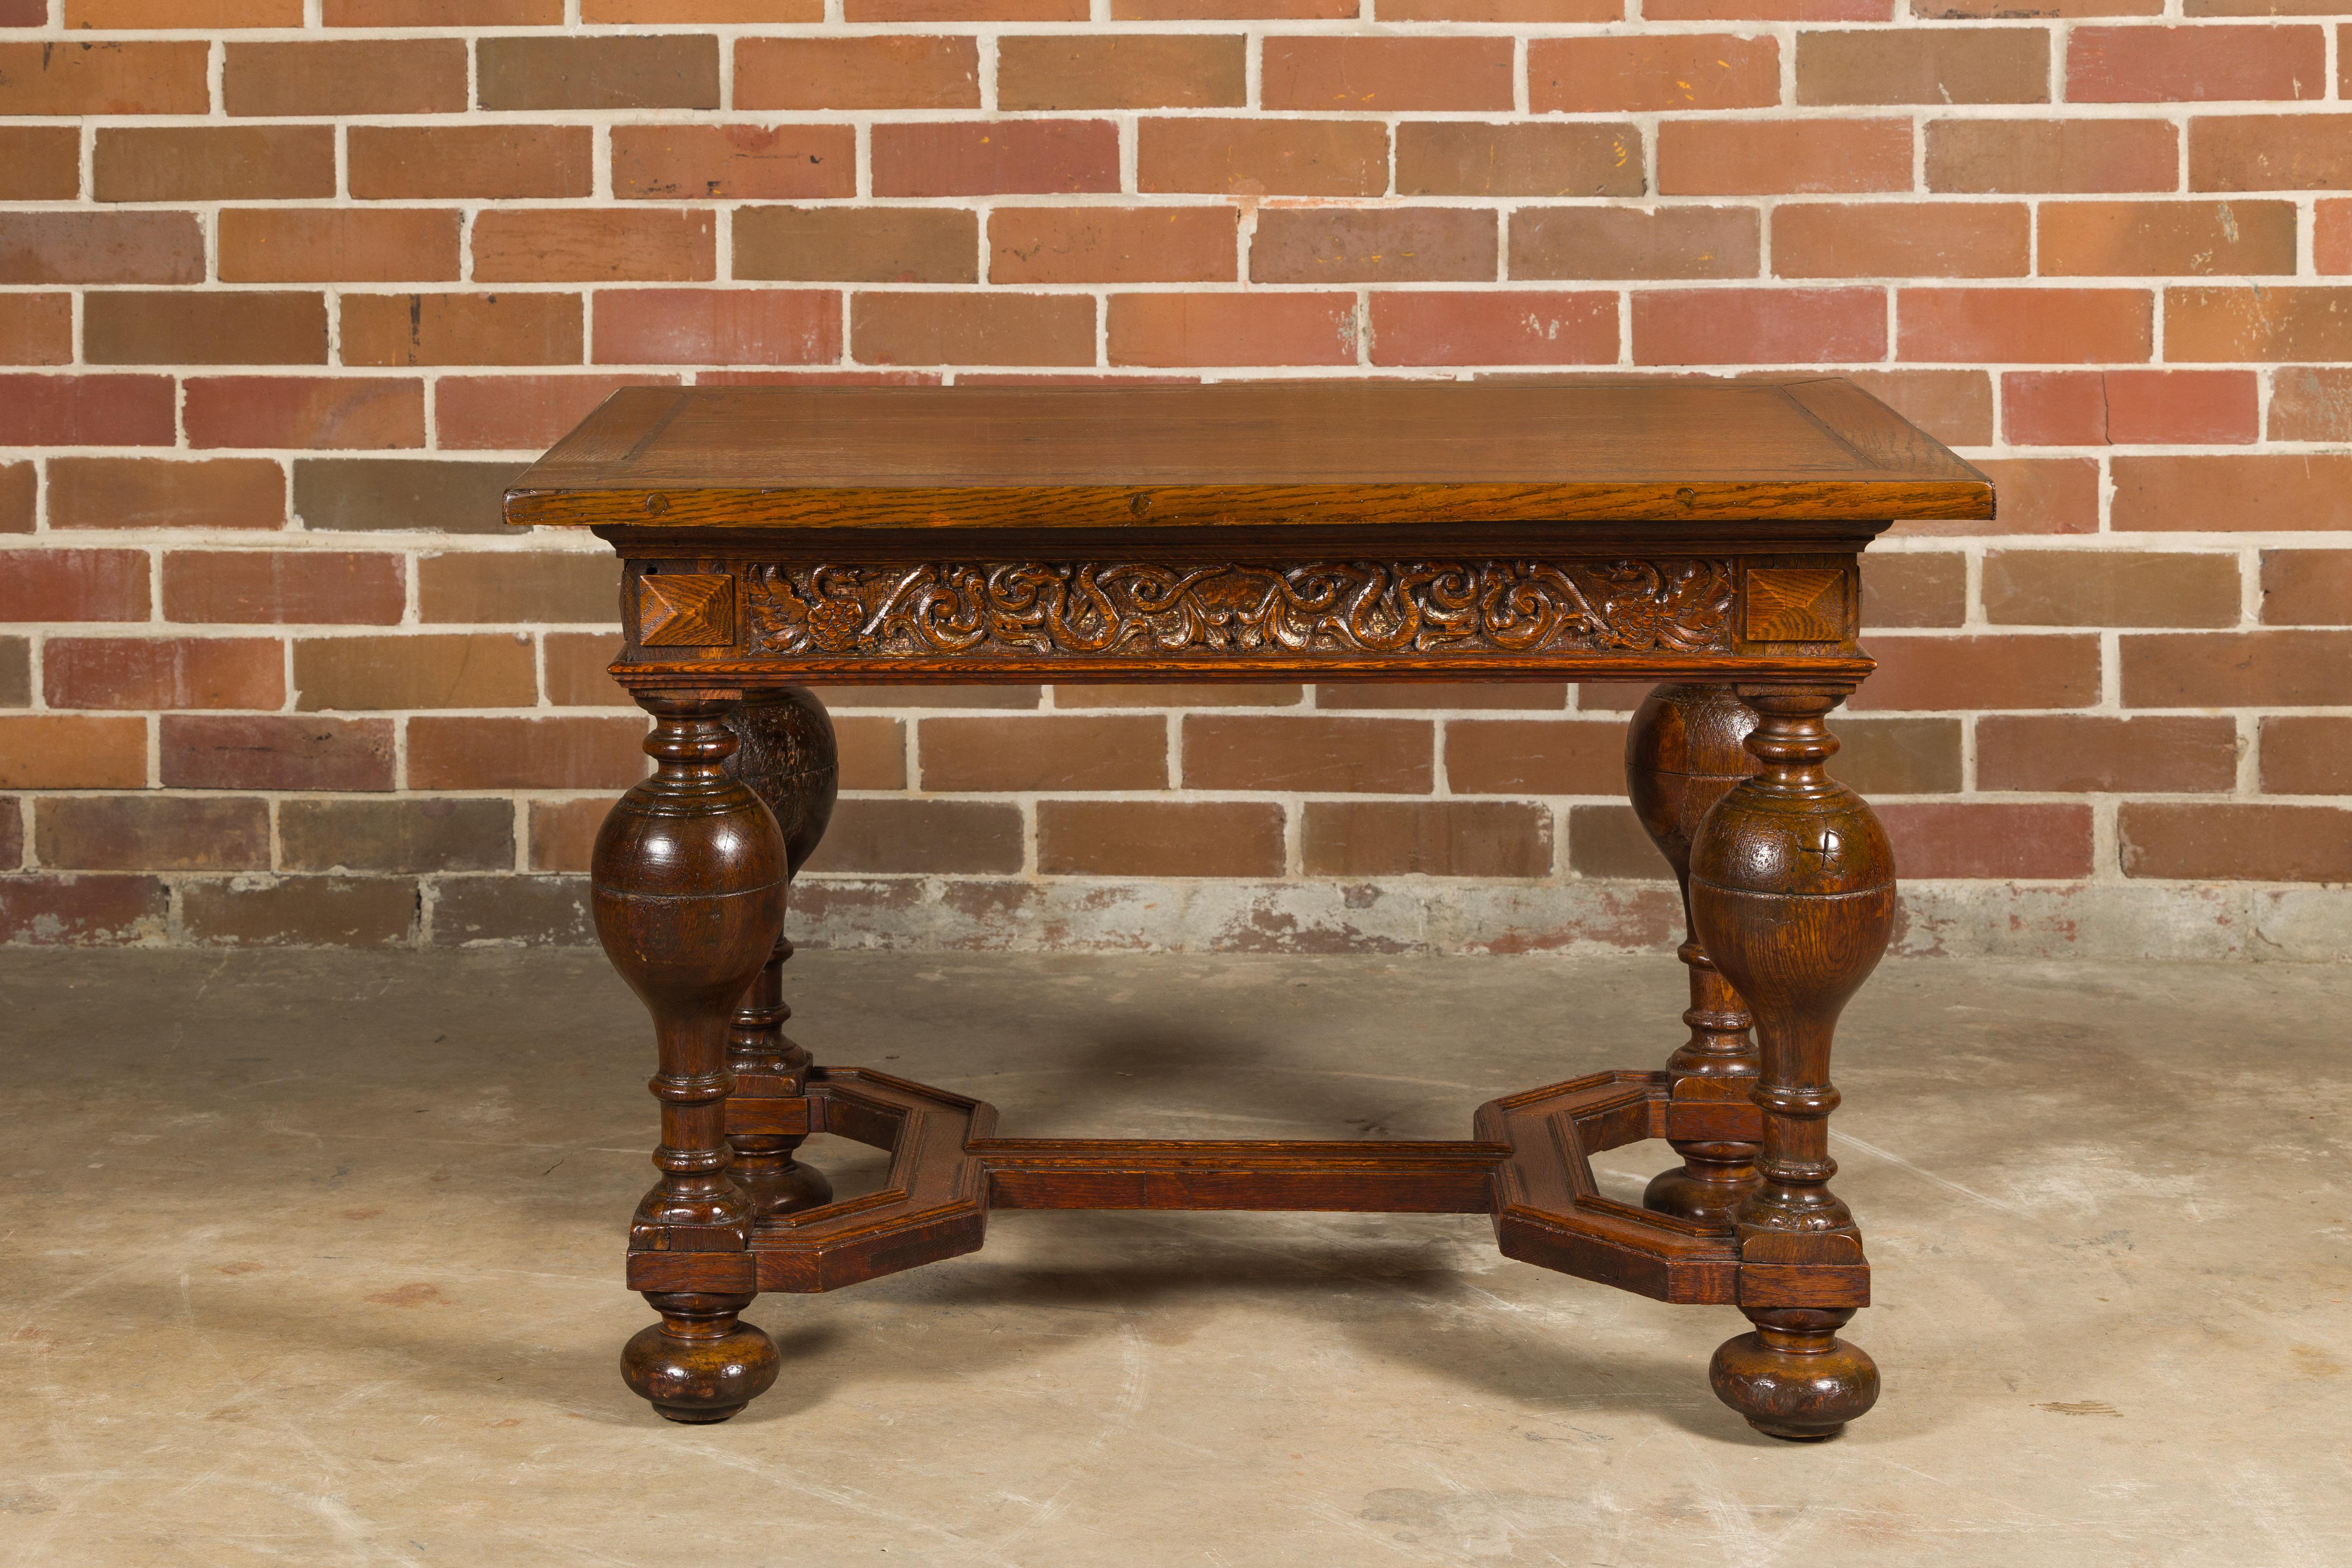 An English oak center table from the 19th century with star-shaped marquetry, carved apron, turned baluster legs and X-Form cross stretcher. This 19th-century English oak center table is a masterpiece of craftsmanship and design. Its star-shaped